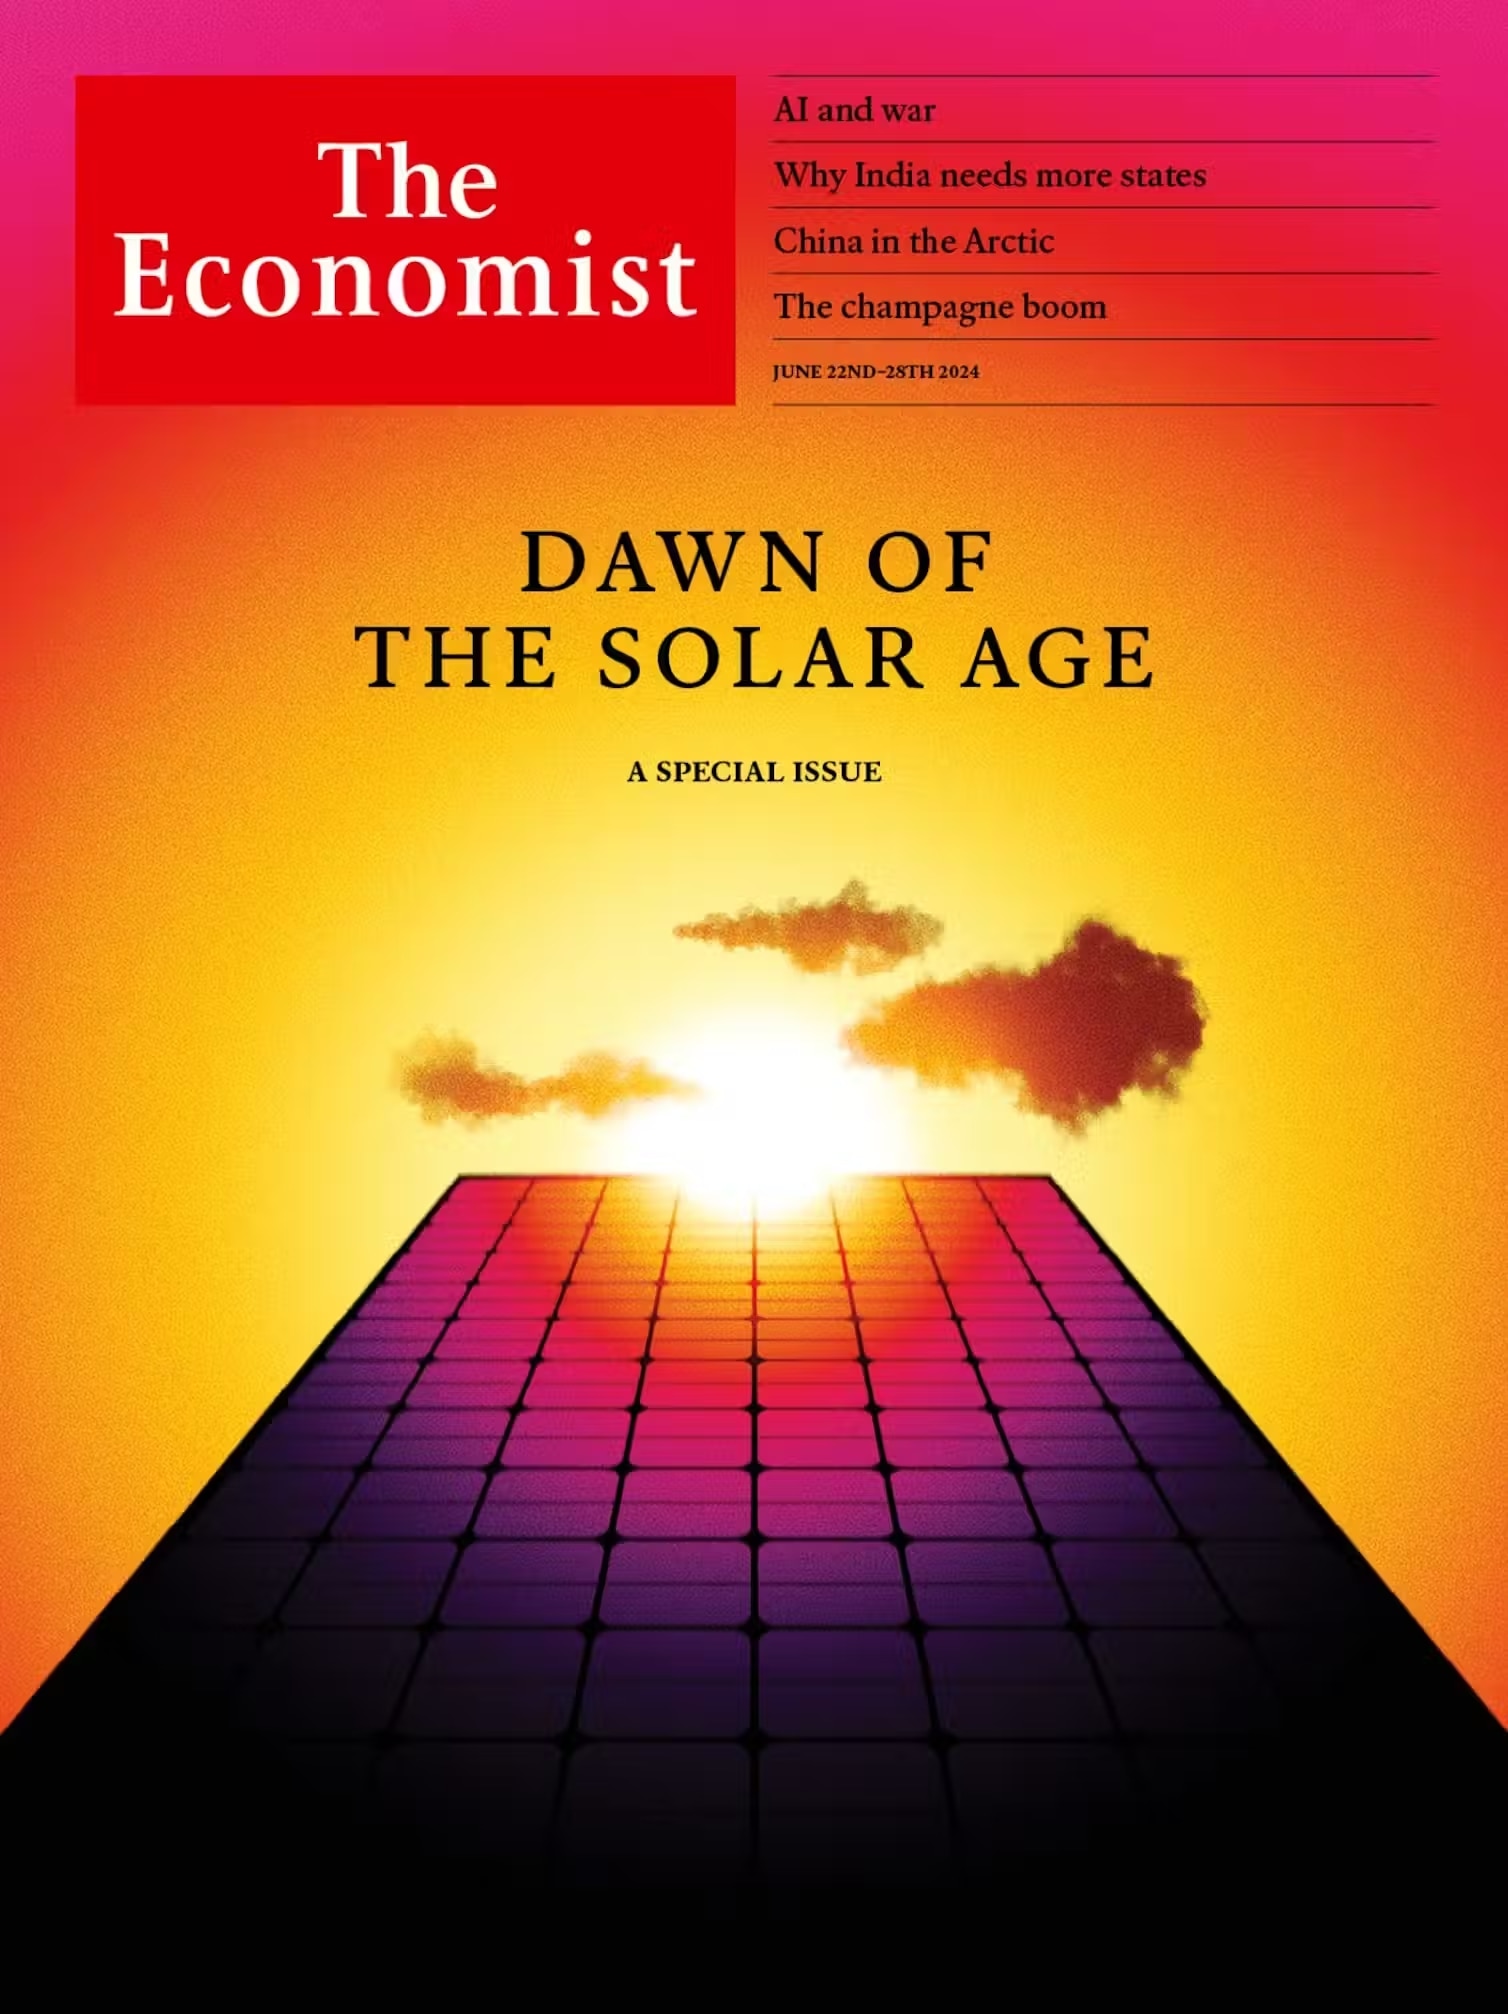 The front cover of The Economist magazine featuring a solar panel and the headline, 'Dawn of the solar age'